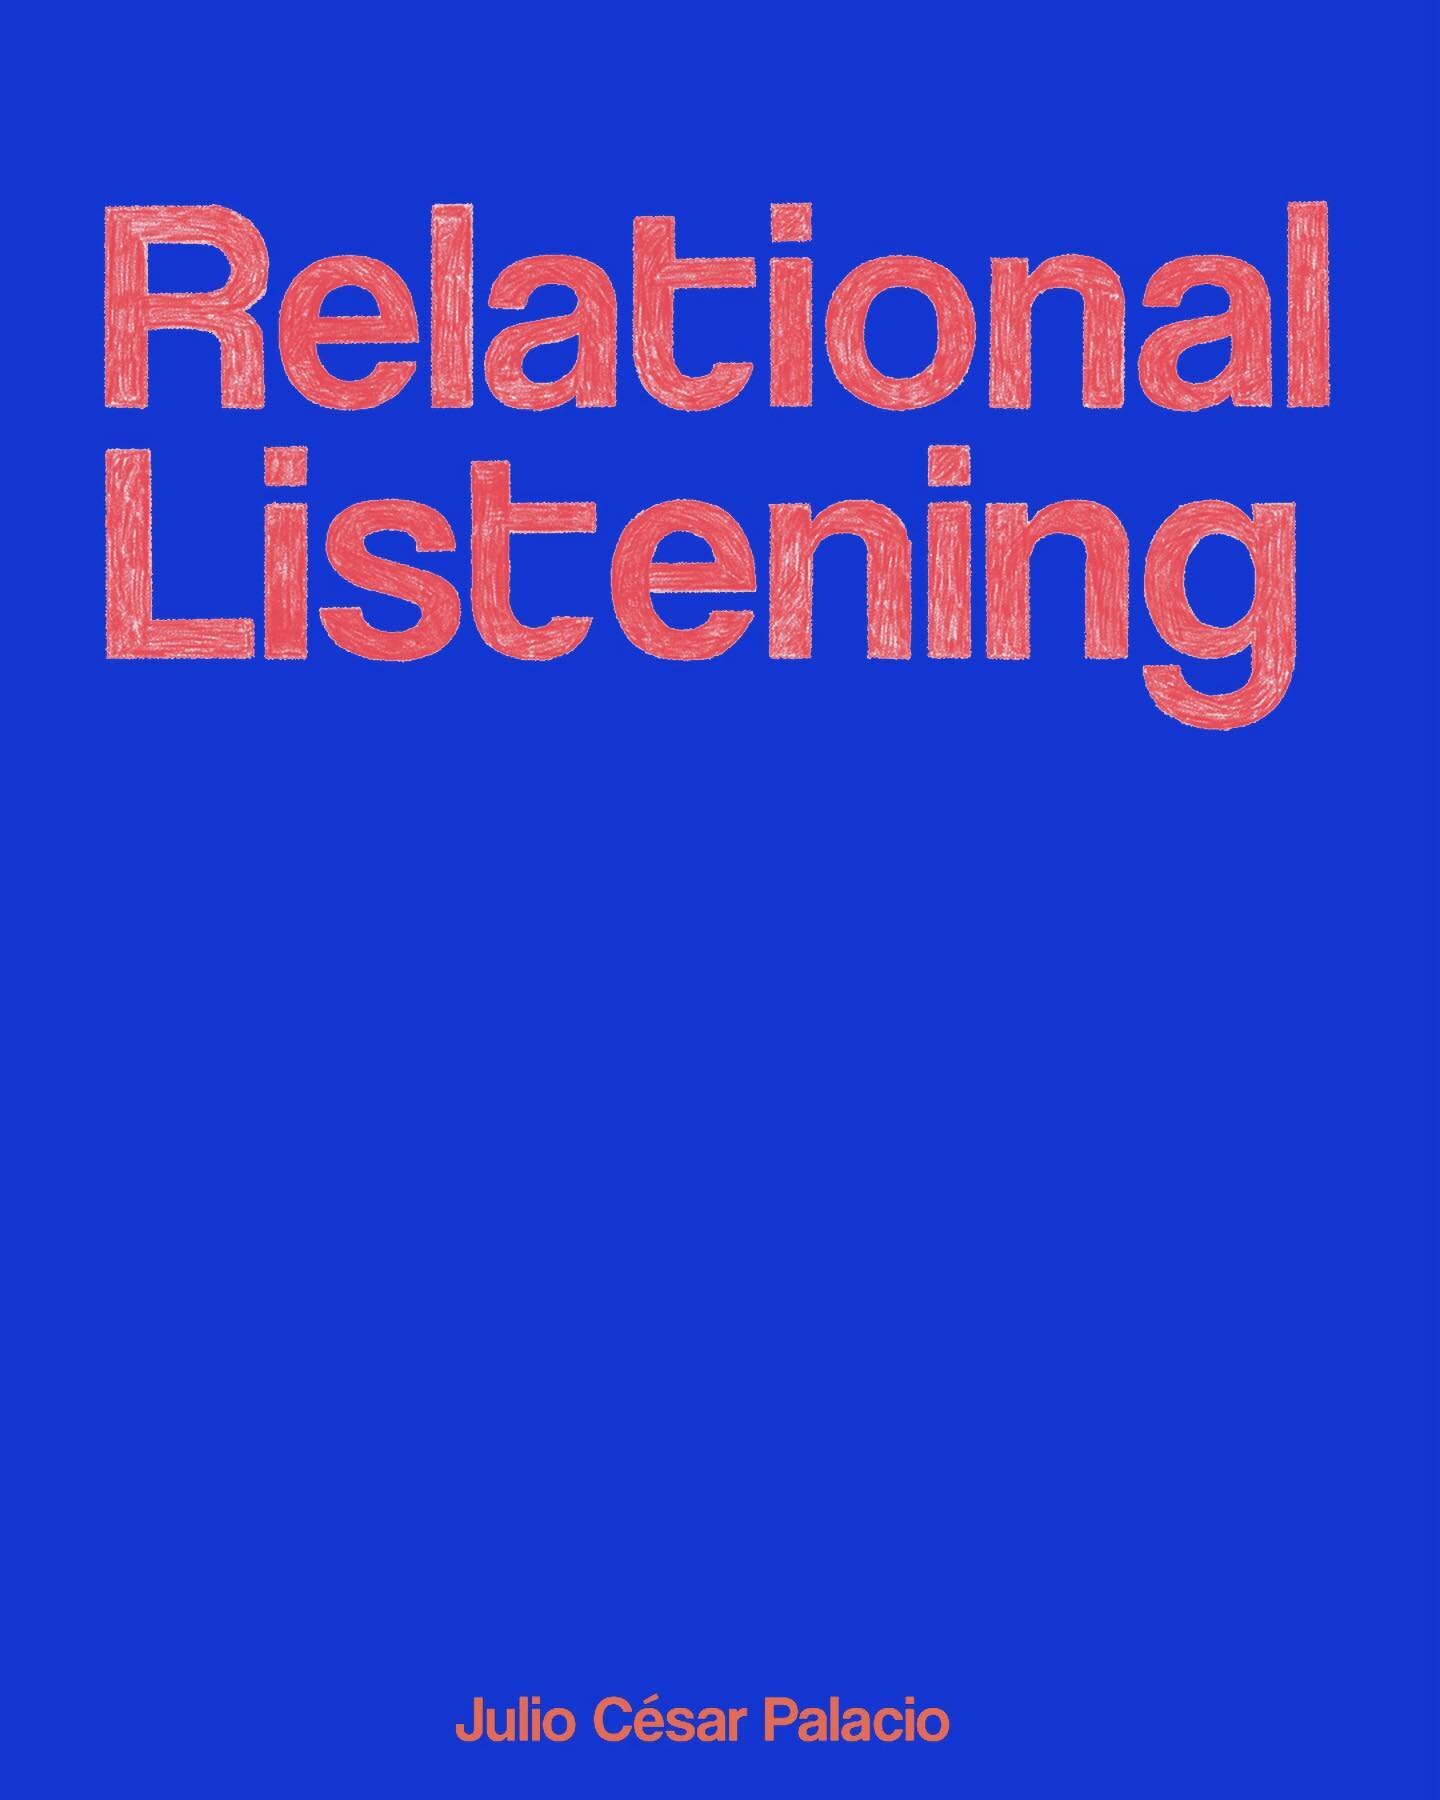 I&rsquo;m performing tonight here in Linz! 
Tomorrow, continuing with the Residency, we will do my new participatory project - RELATIONAL LISTENING -.

I'm having a blast here thanks to: @wirtshaus.secrets Residency. 

 I will upload some images soon